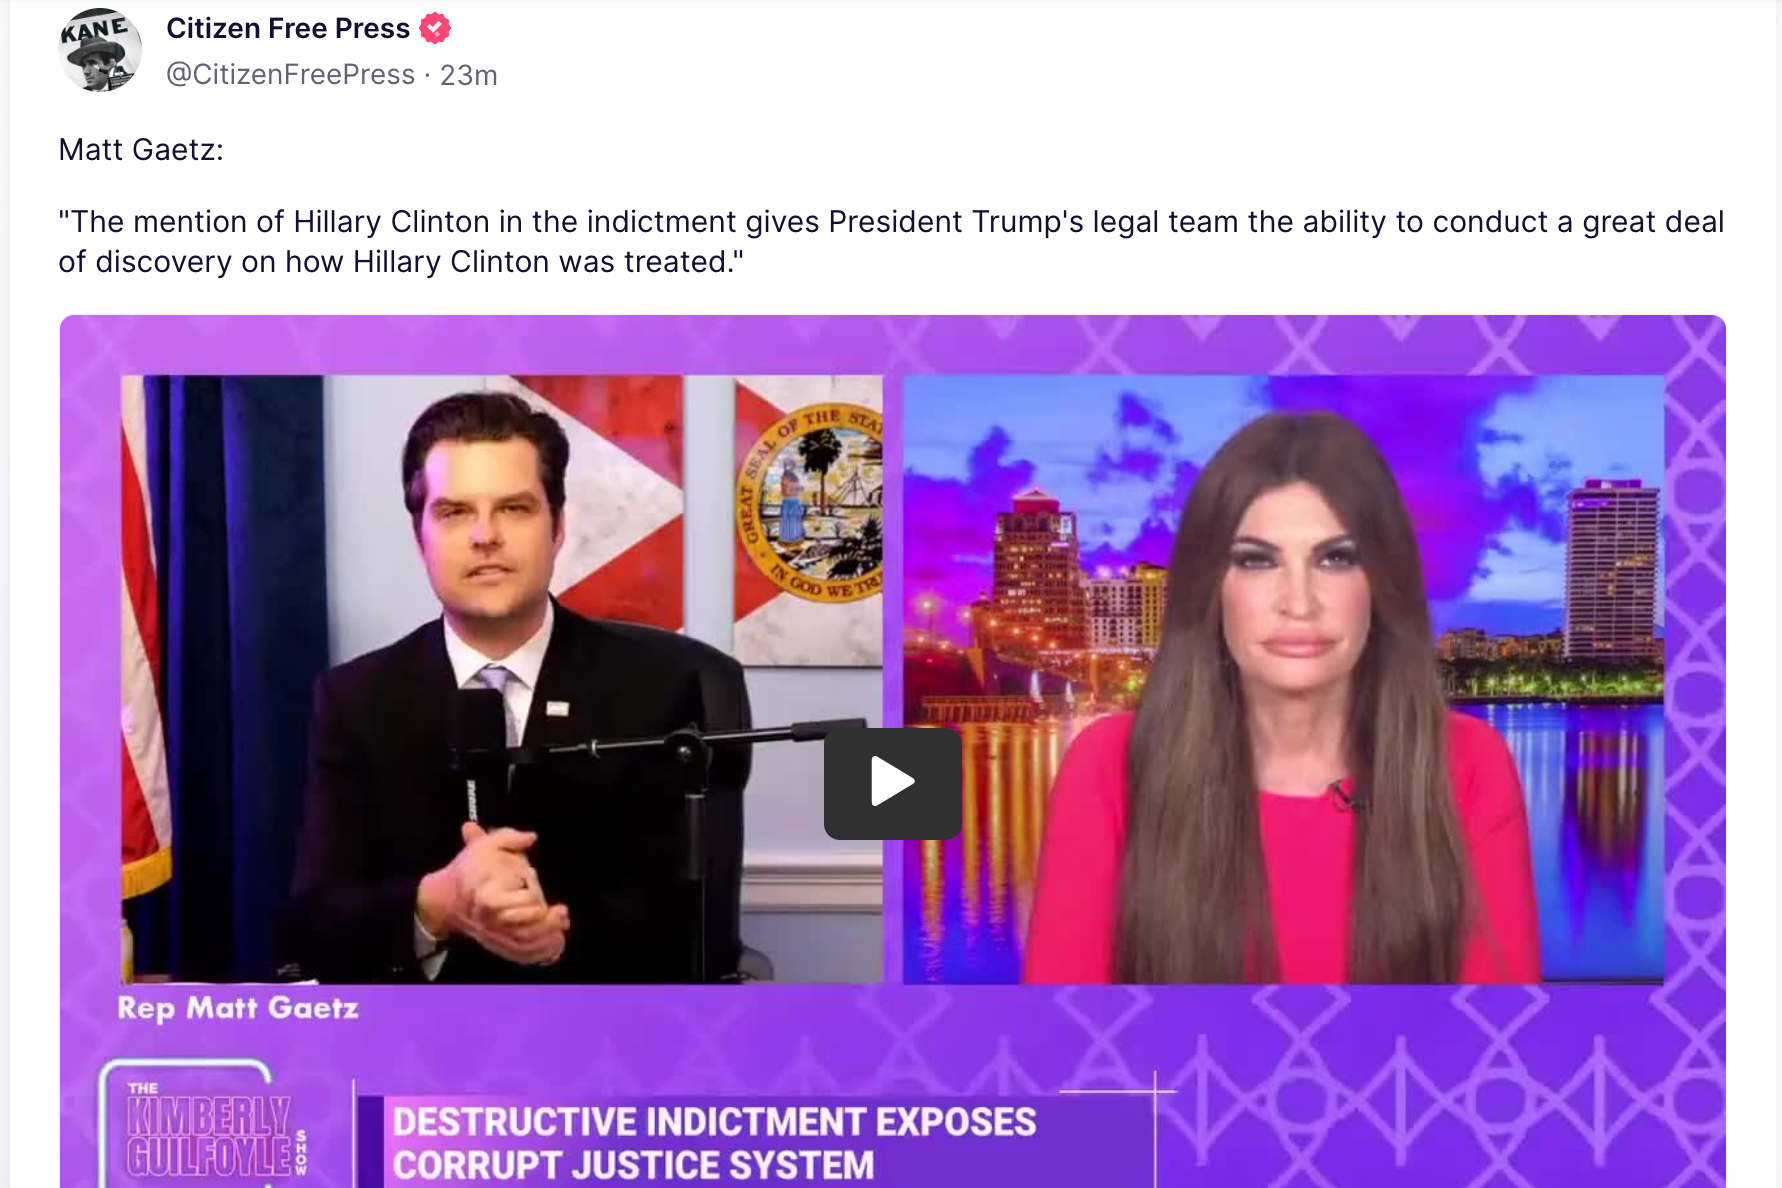 A video embed of Matt Gaetz on Kimberly Guilfoyle's show, in which he recommends going after Hillary Clinton